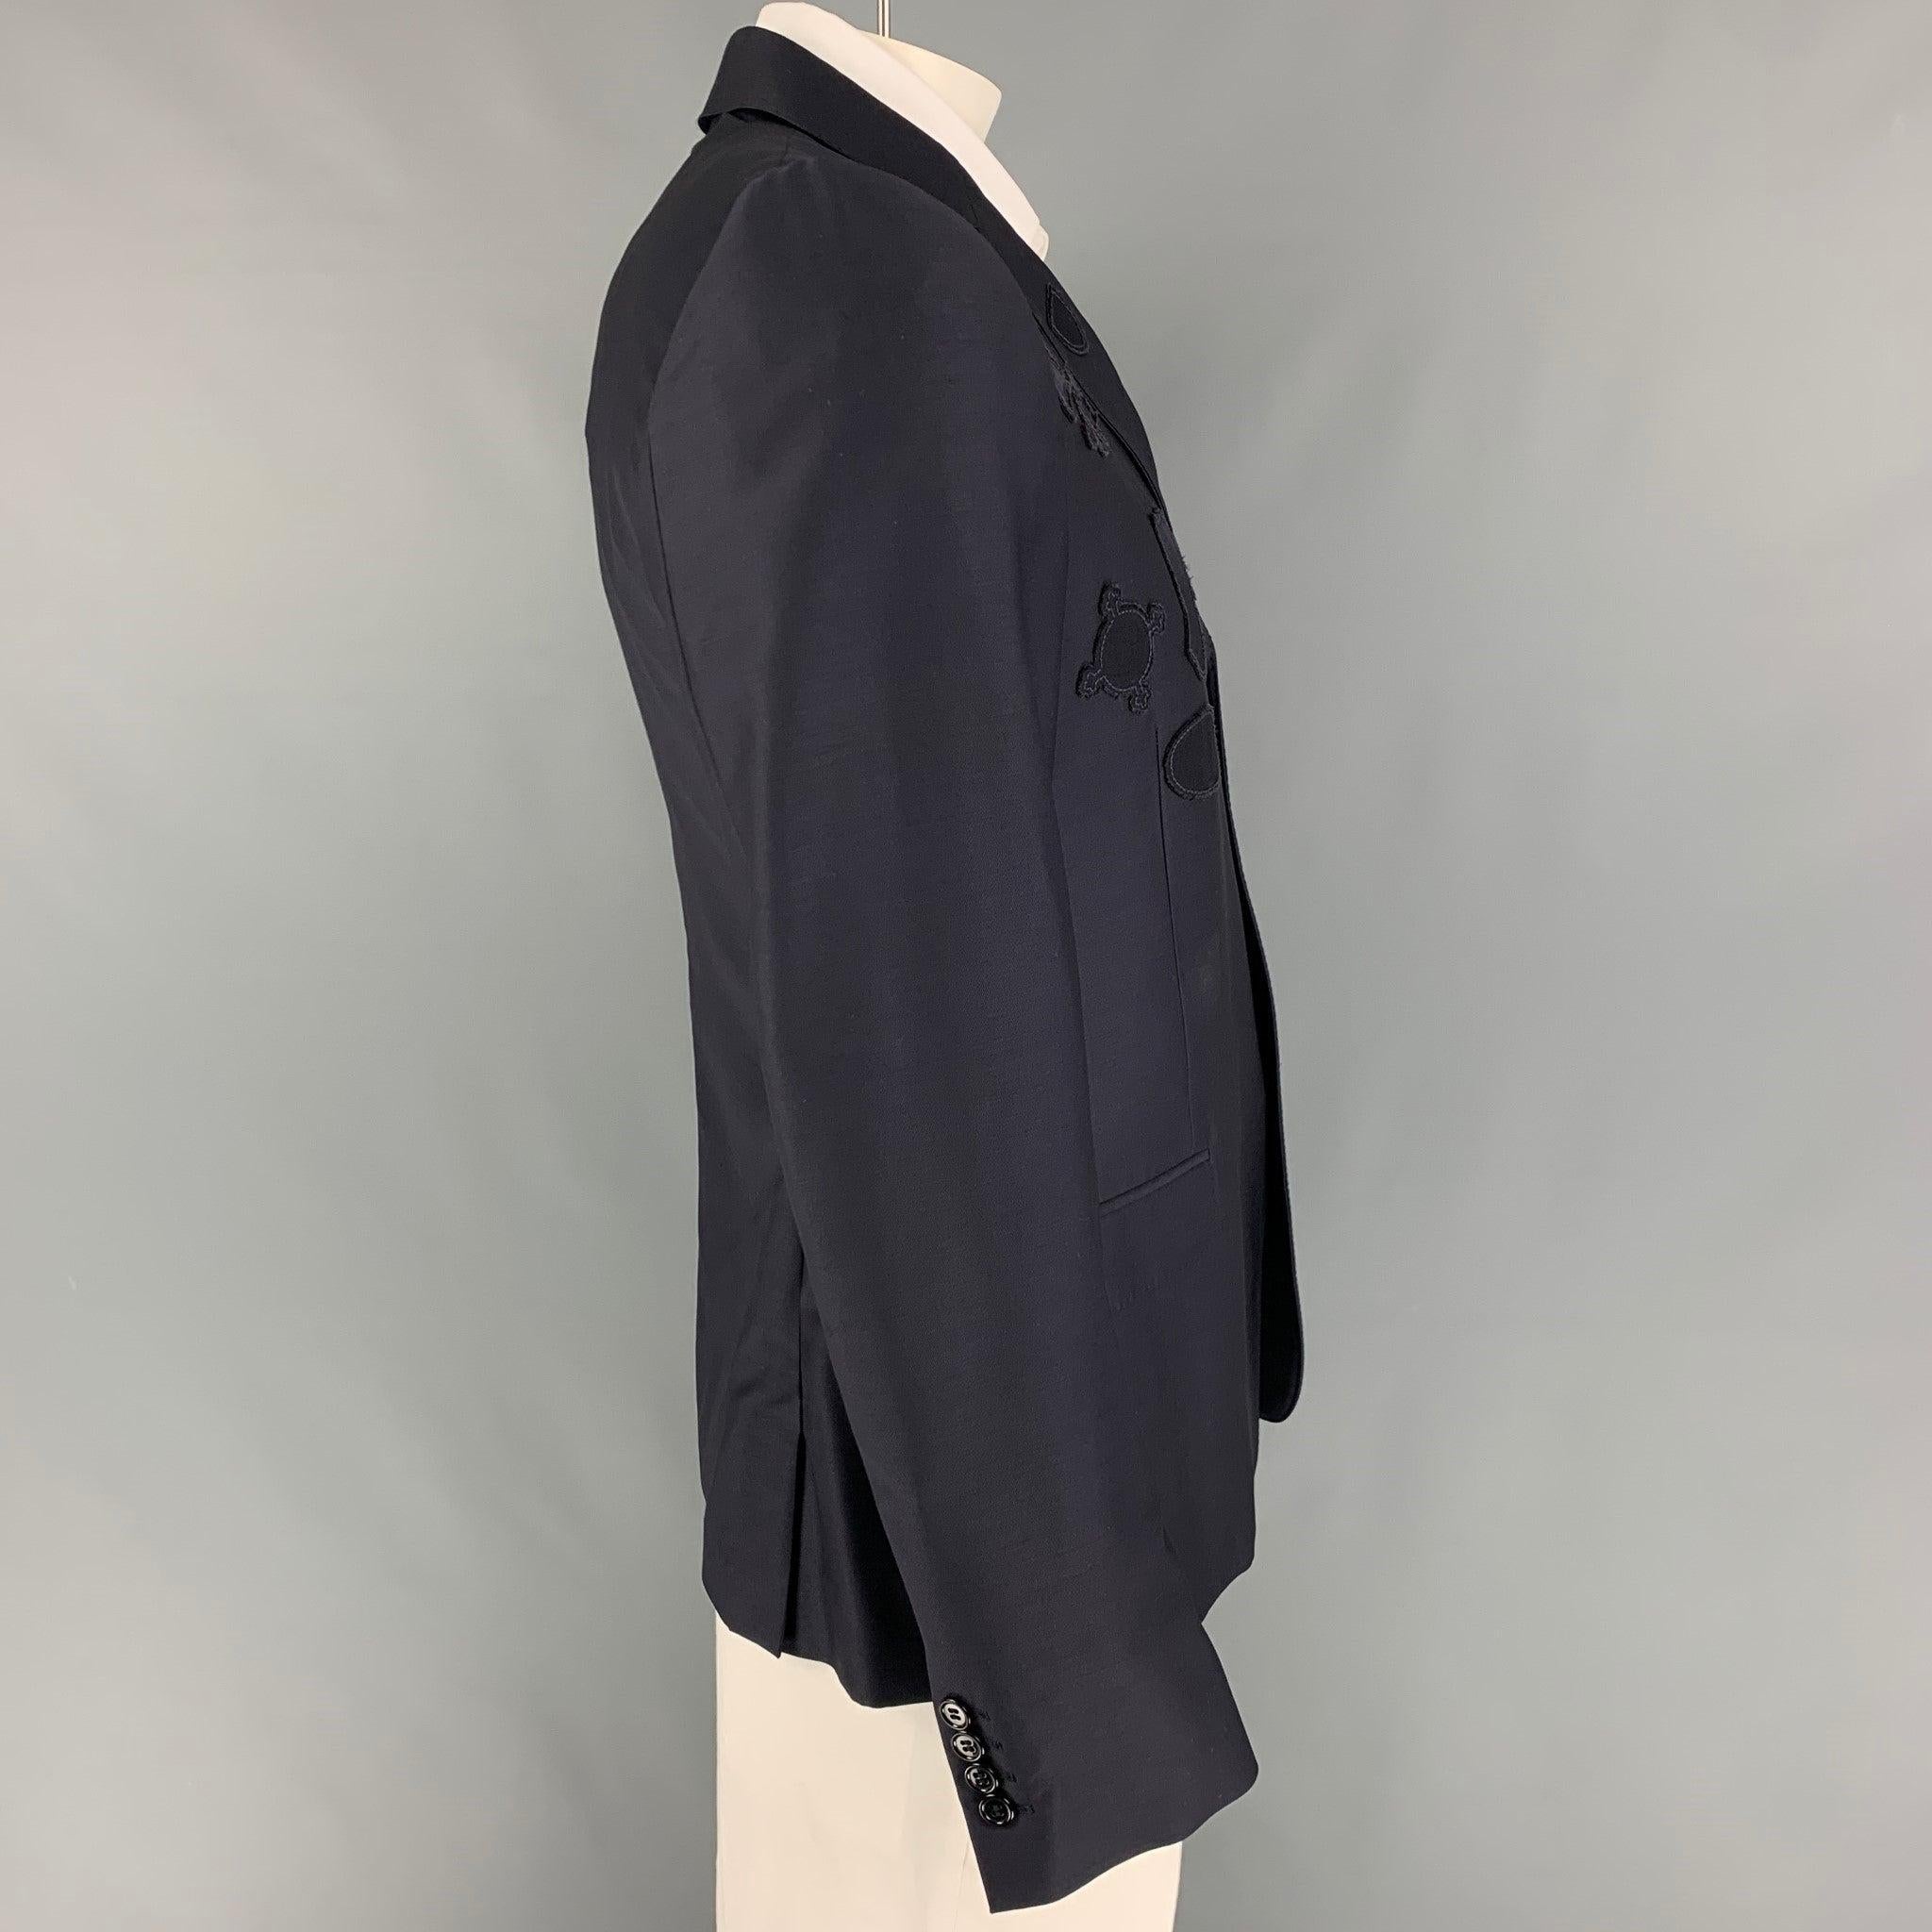 ALEXANDER McQUEEN sport coat comes in a navy wool with a half liner featuring a notch lapel, patch designs, flap pockets, double back vent, and a three button closure. Made in Italy. Excellent
Pre-Owned Condition. 

Marked:   54 

Measurements: 
